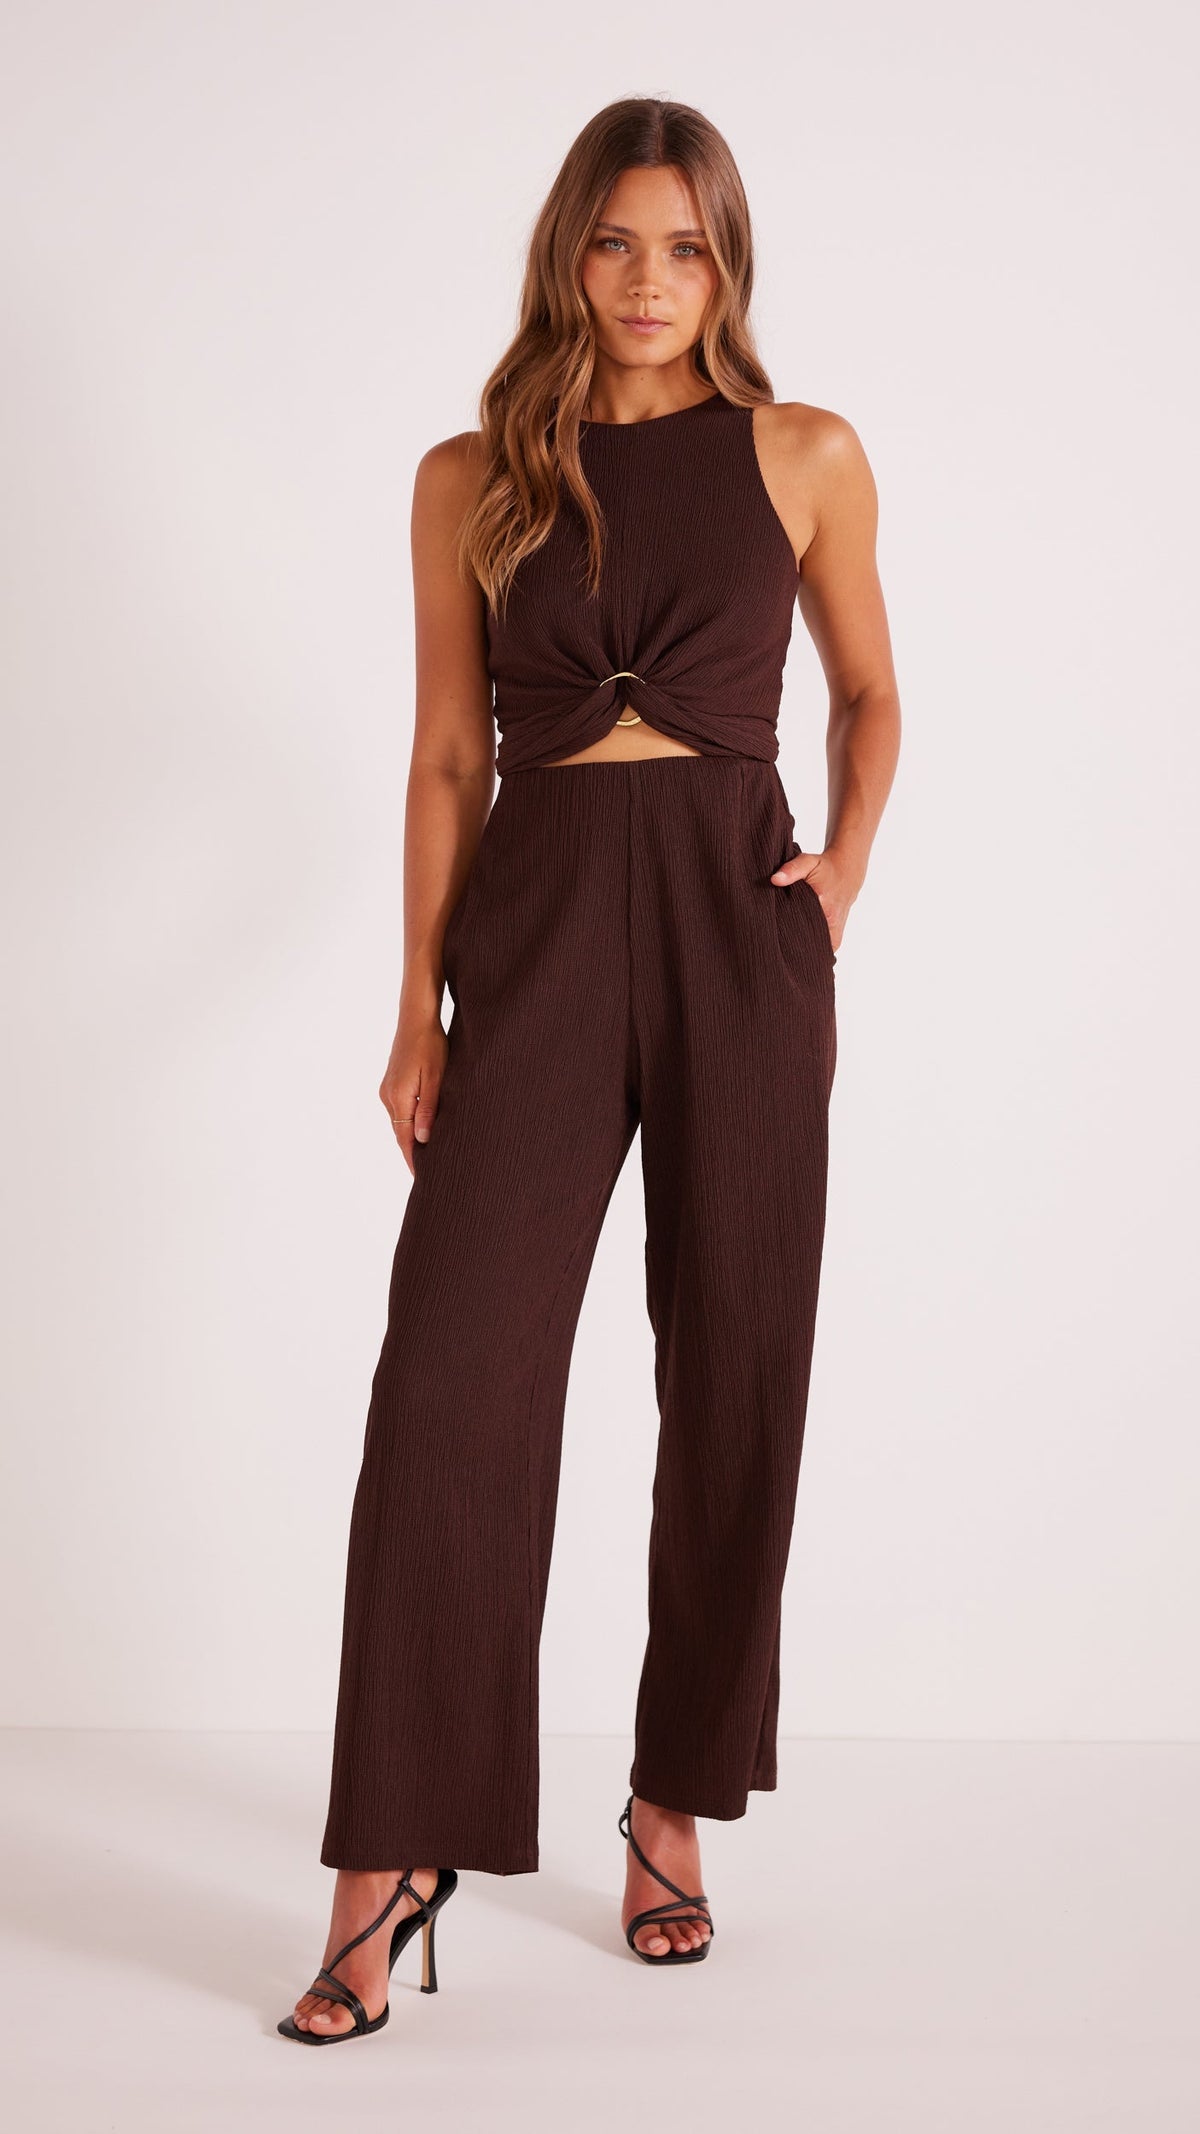 30_MG2303221_MG2303240_Minkpink_1830-UNITY RELAXED PANT-MINKPINK